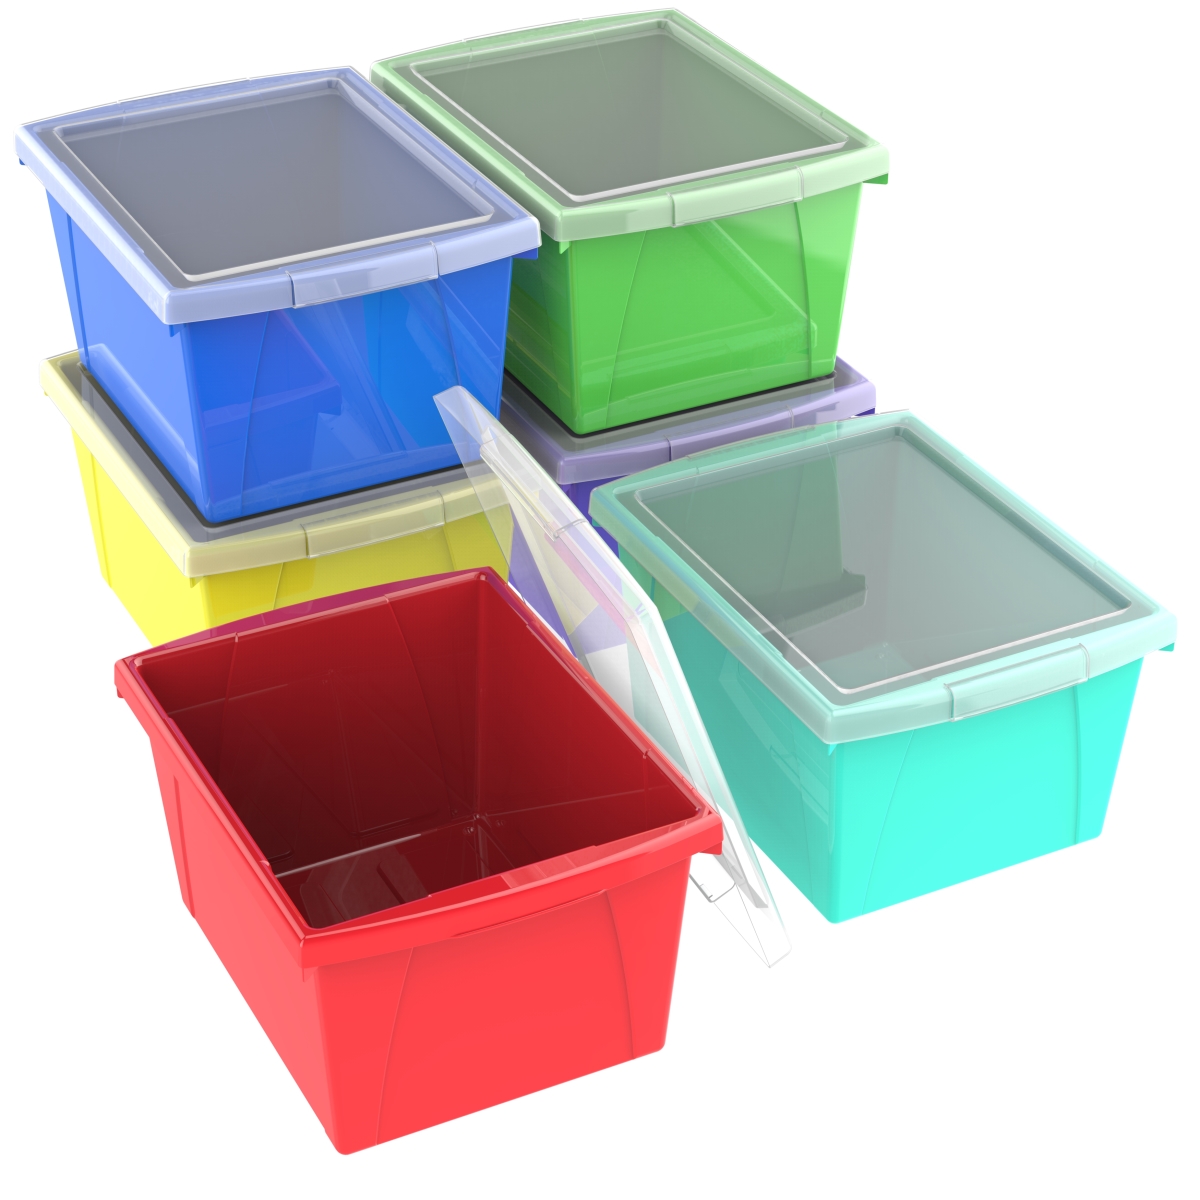 Picture of Storex 61406U06C 4 gal Classroom Storage Bin with Lid, Assorted Color - Pack of 6